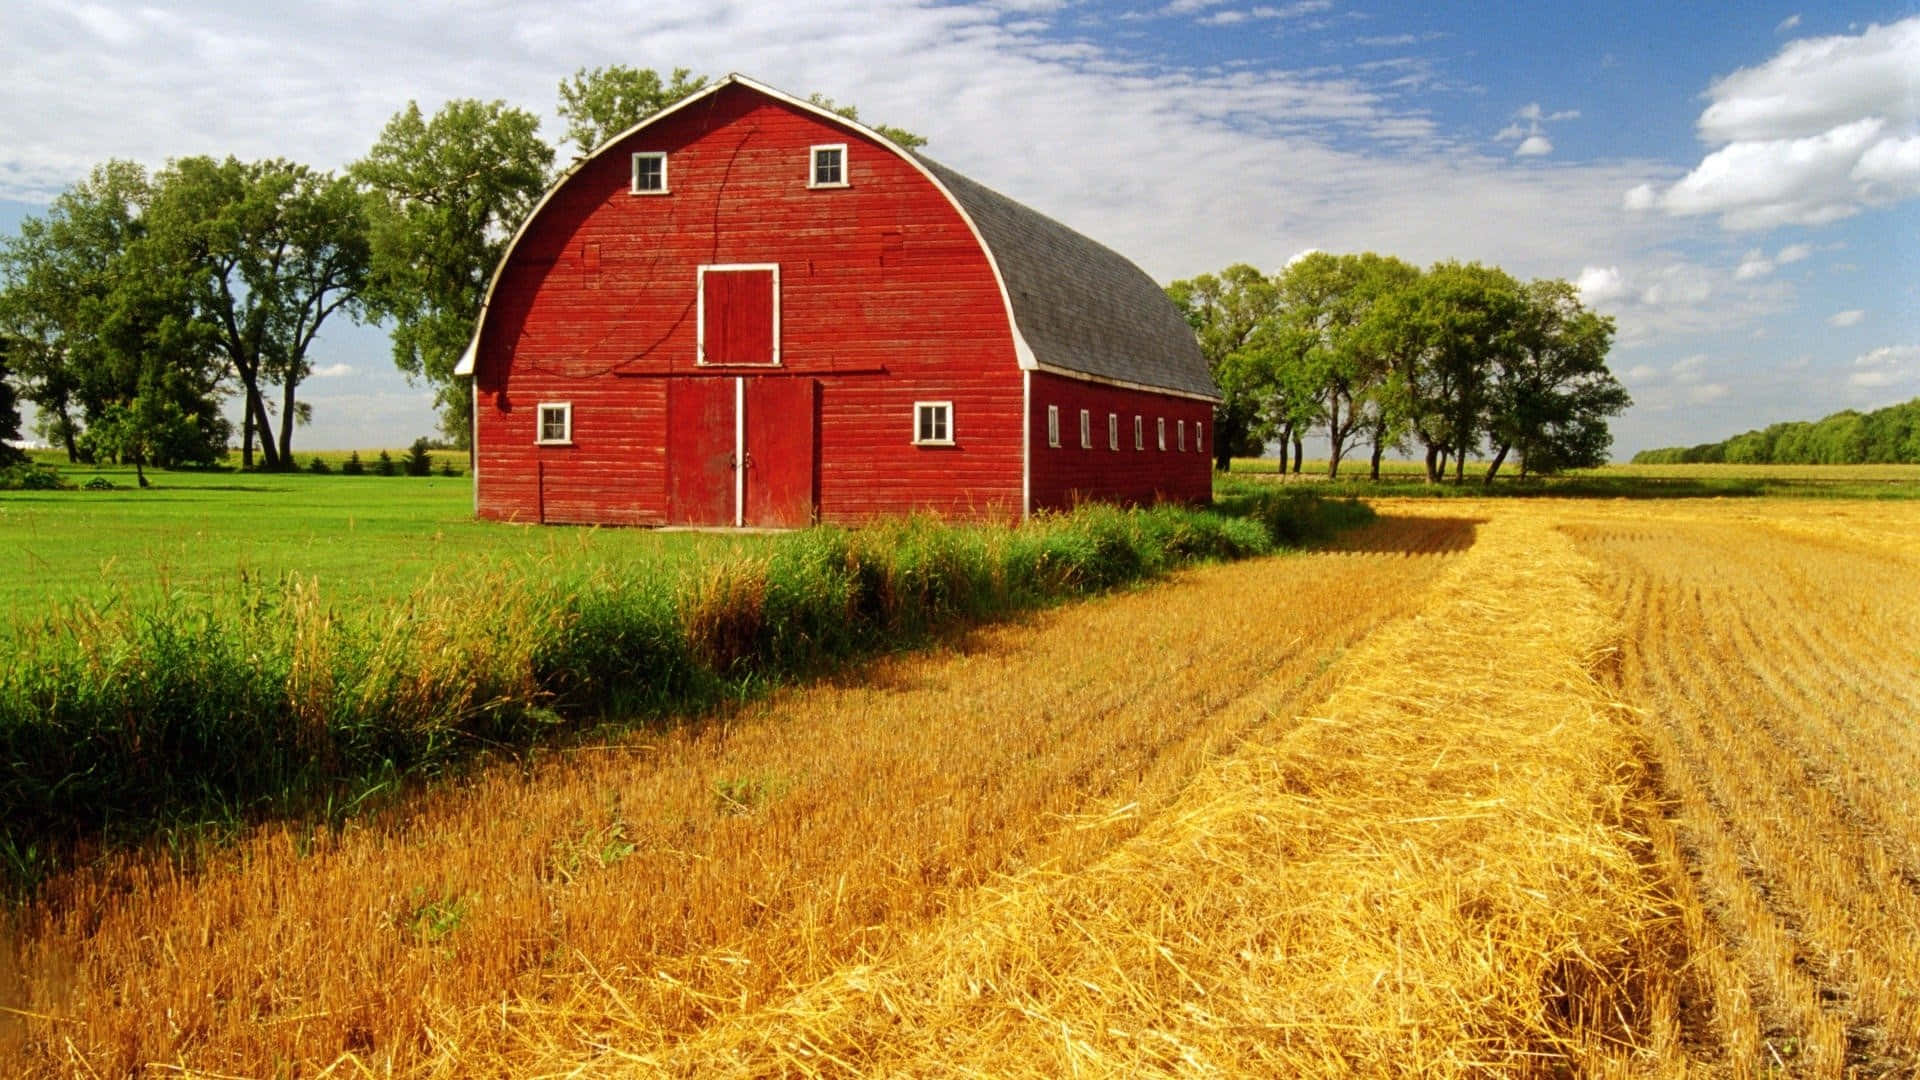 Enjoy a peaceful late summer day at an old farm